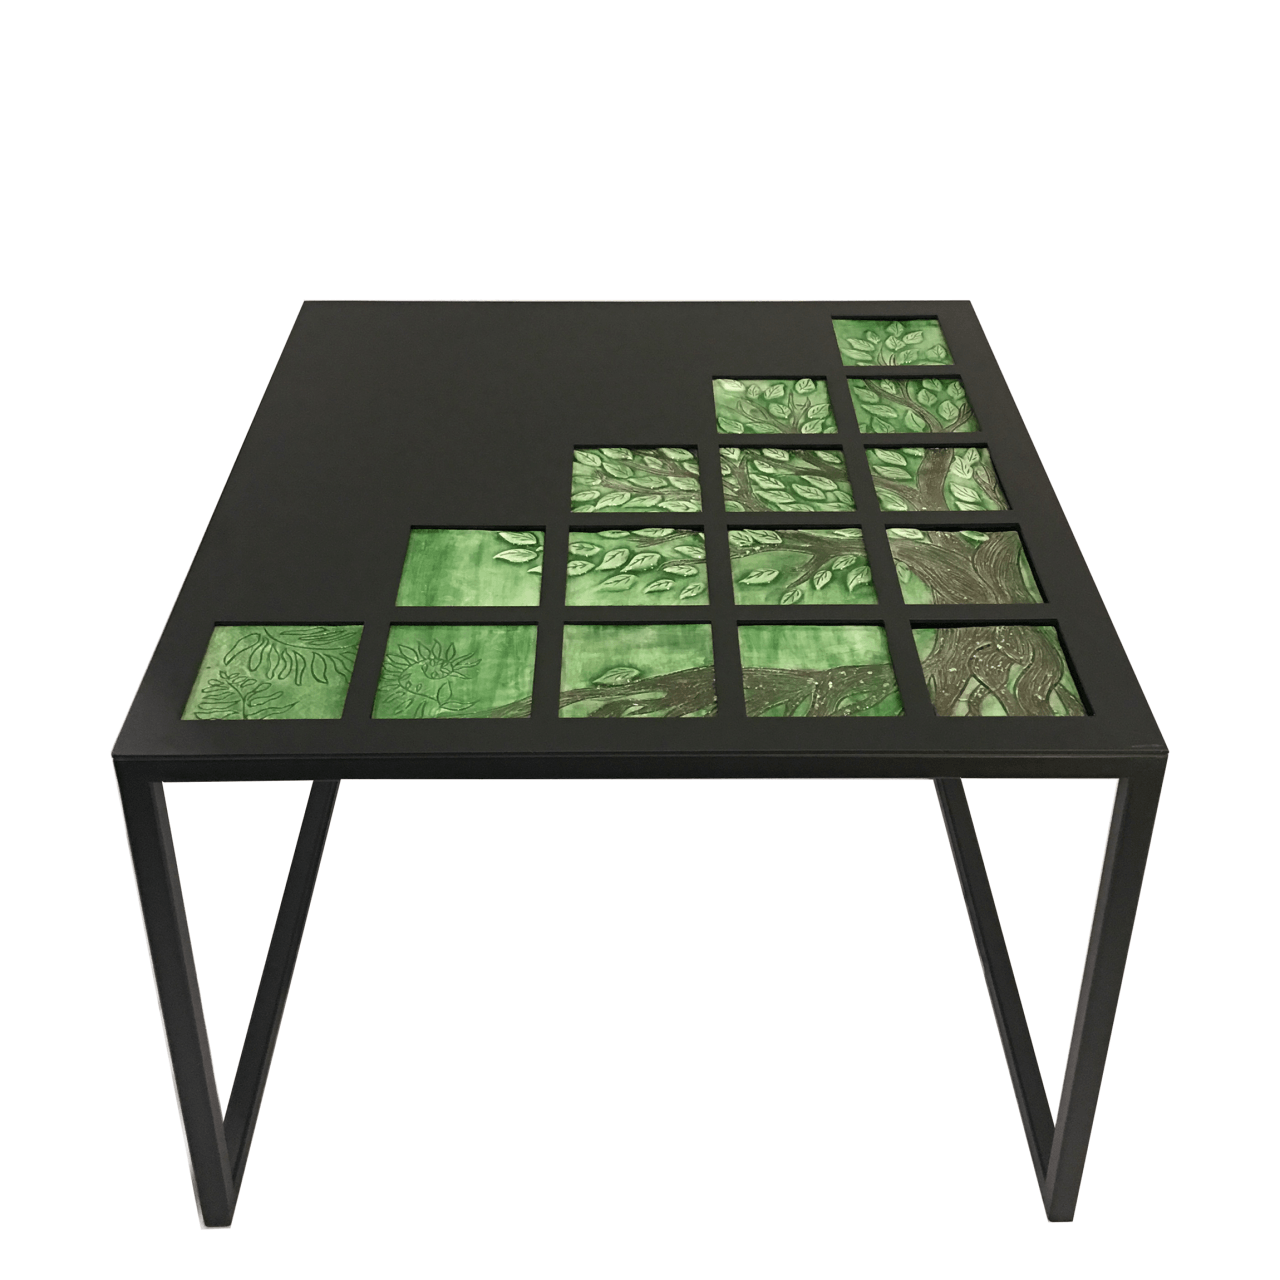 Natural Coffee Table is 100% handmade. Limited Edition